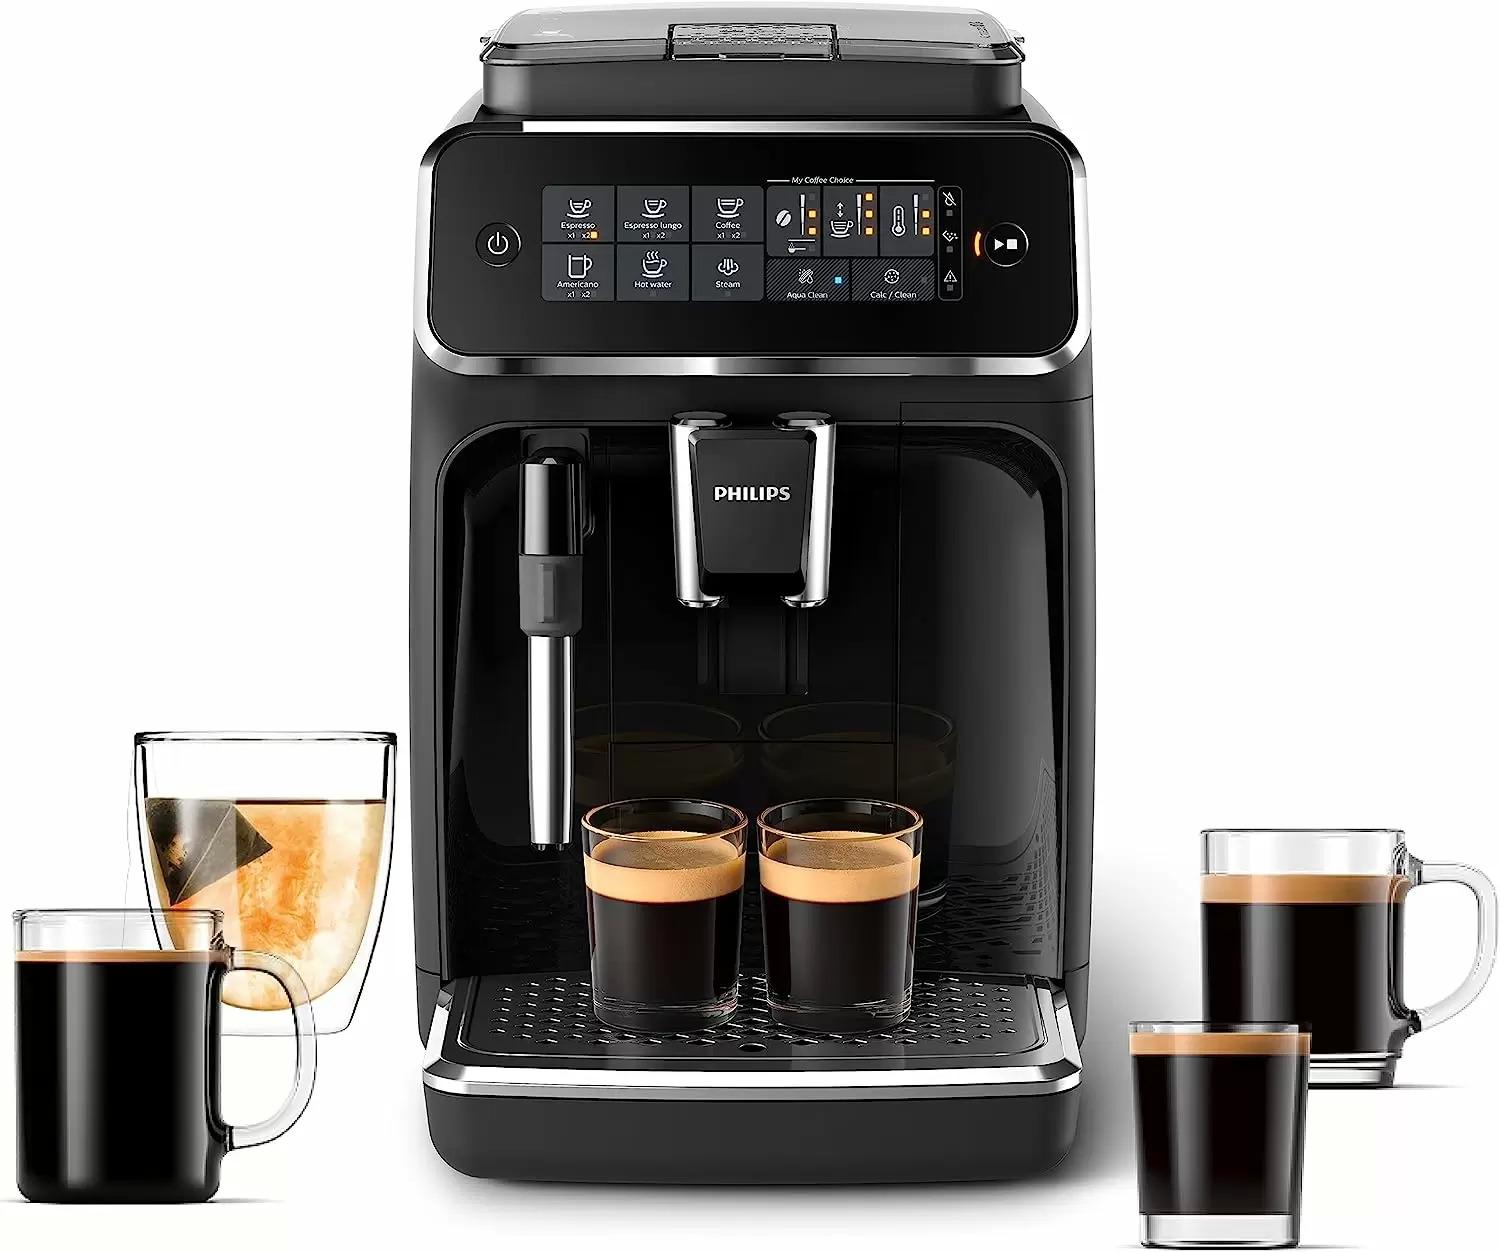 Philips 3200 Series Fully Automatic Espresso Machine with Milk Frother for $399